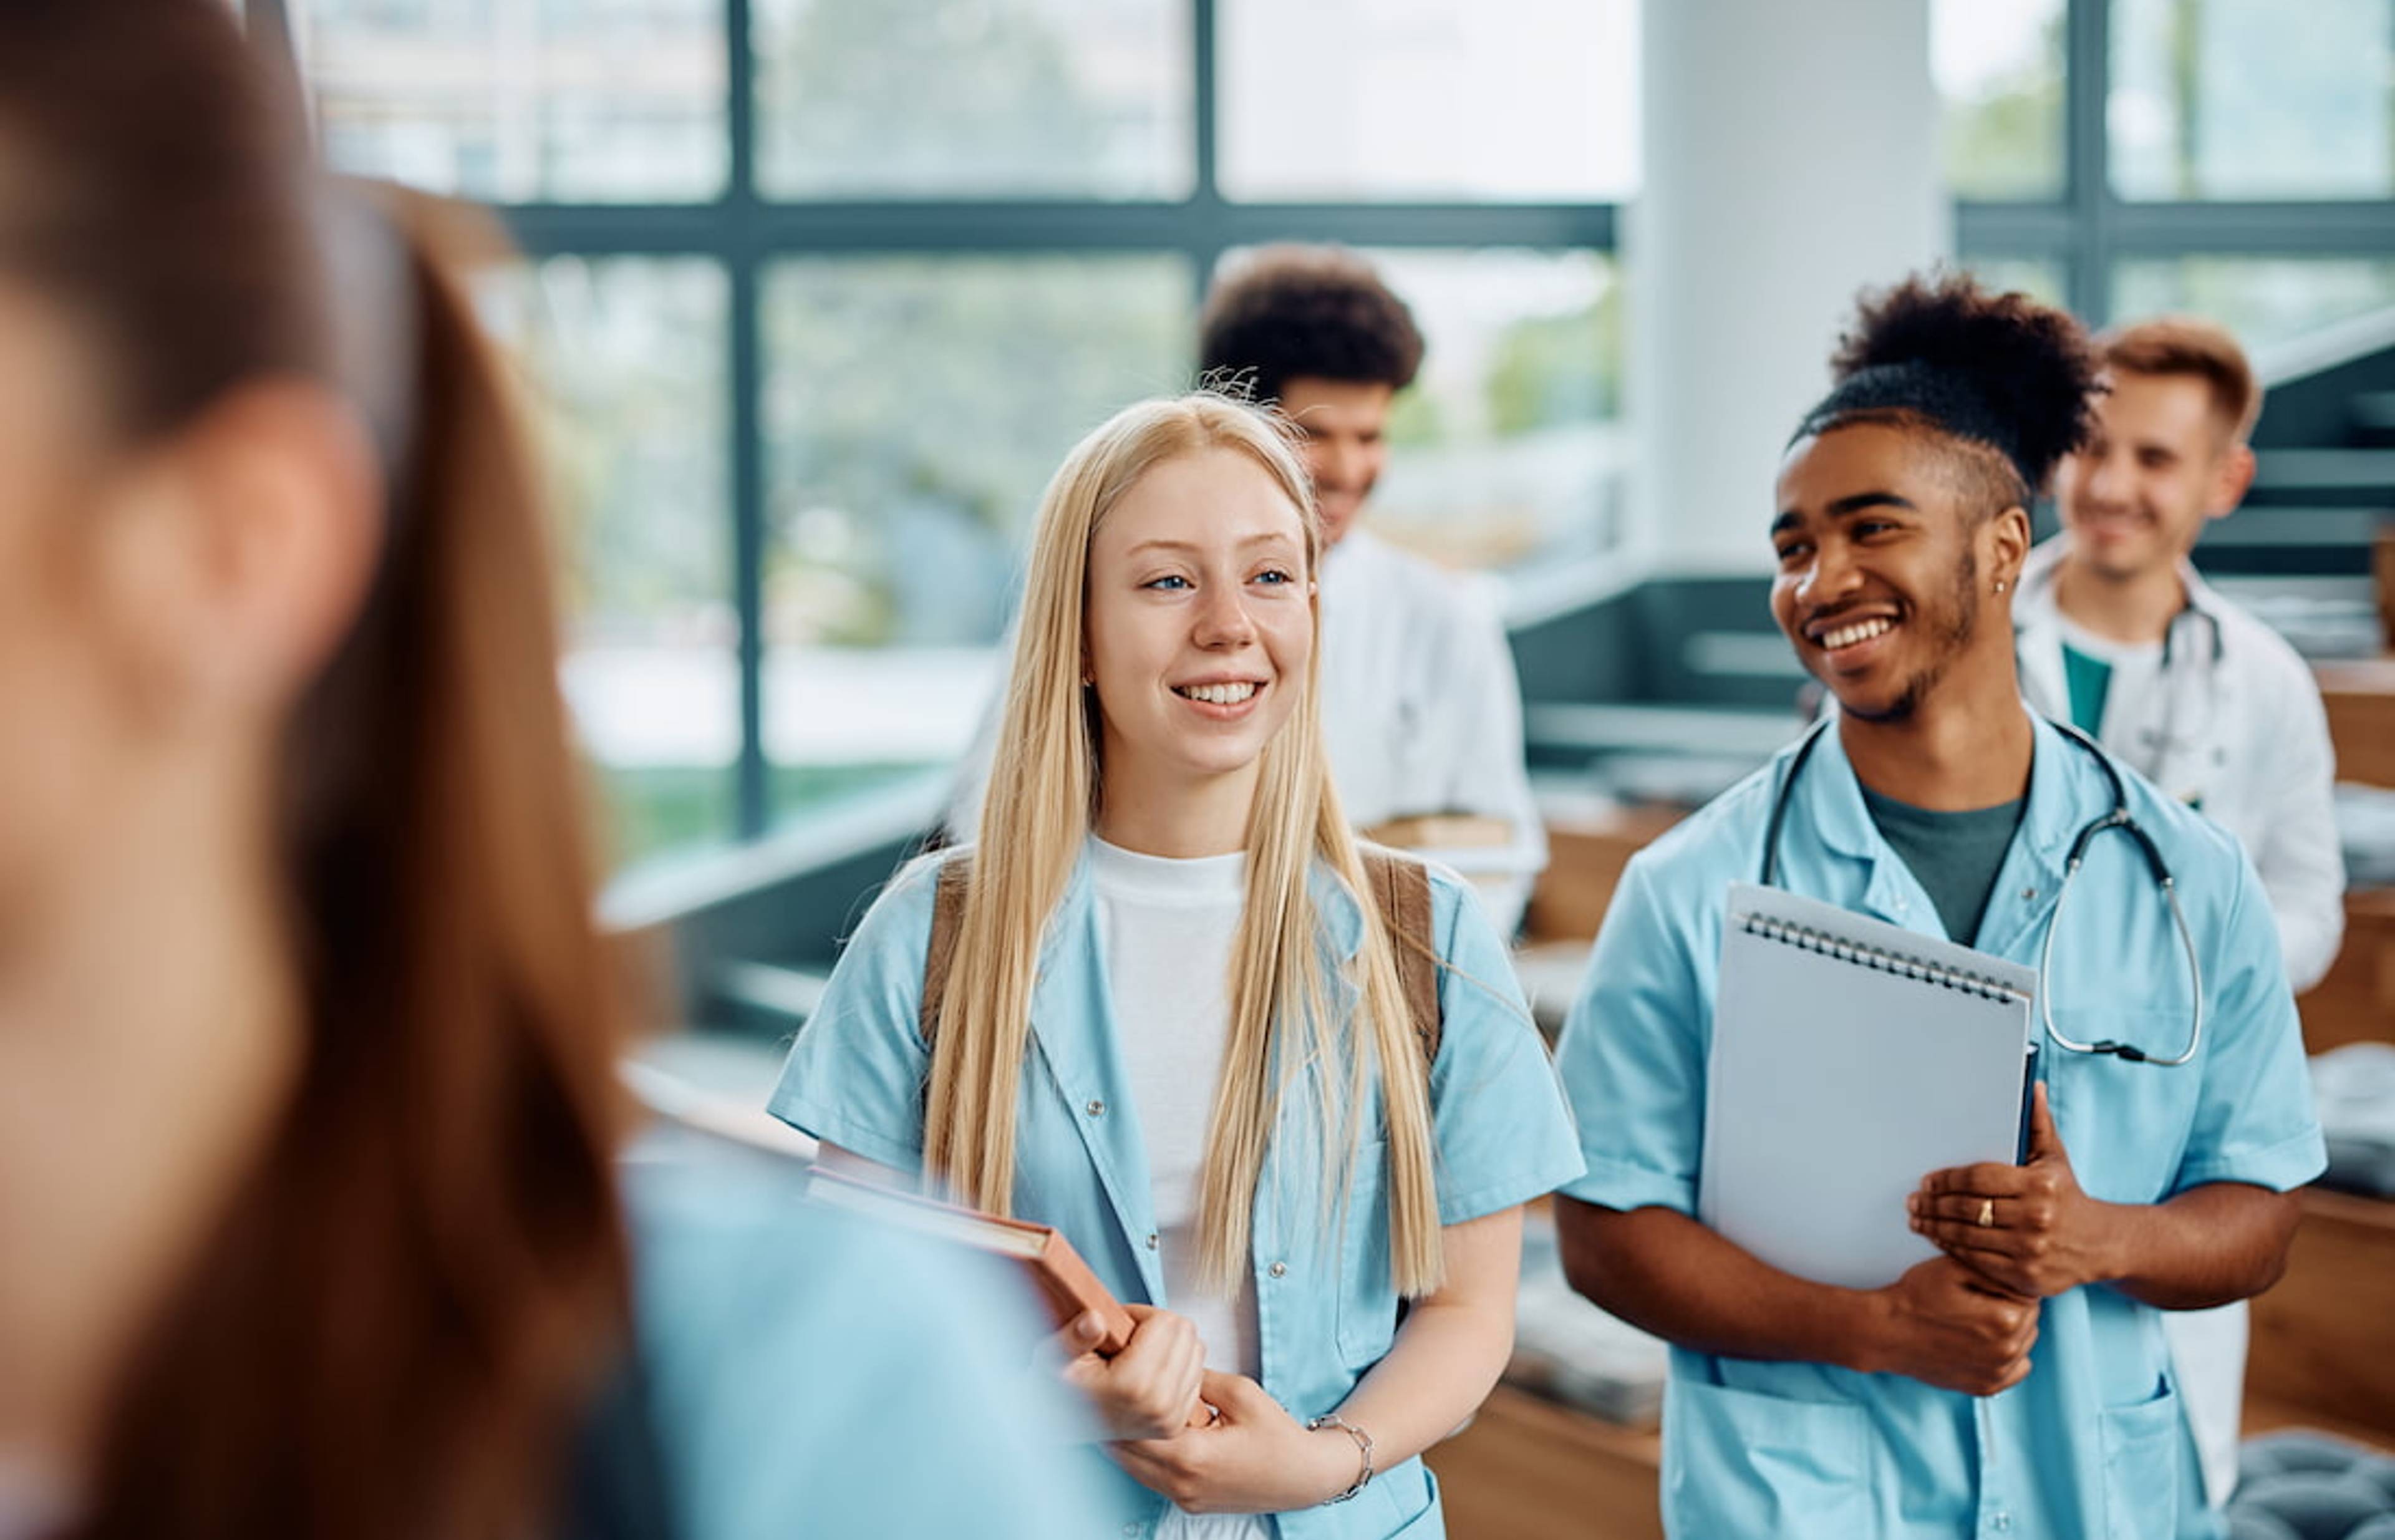 Applying to Medical School: Tips from a Current Student